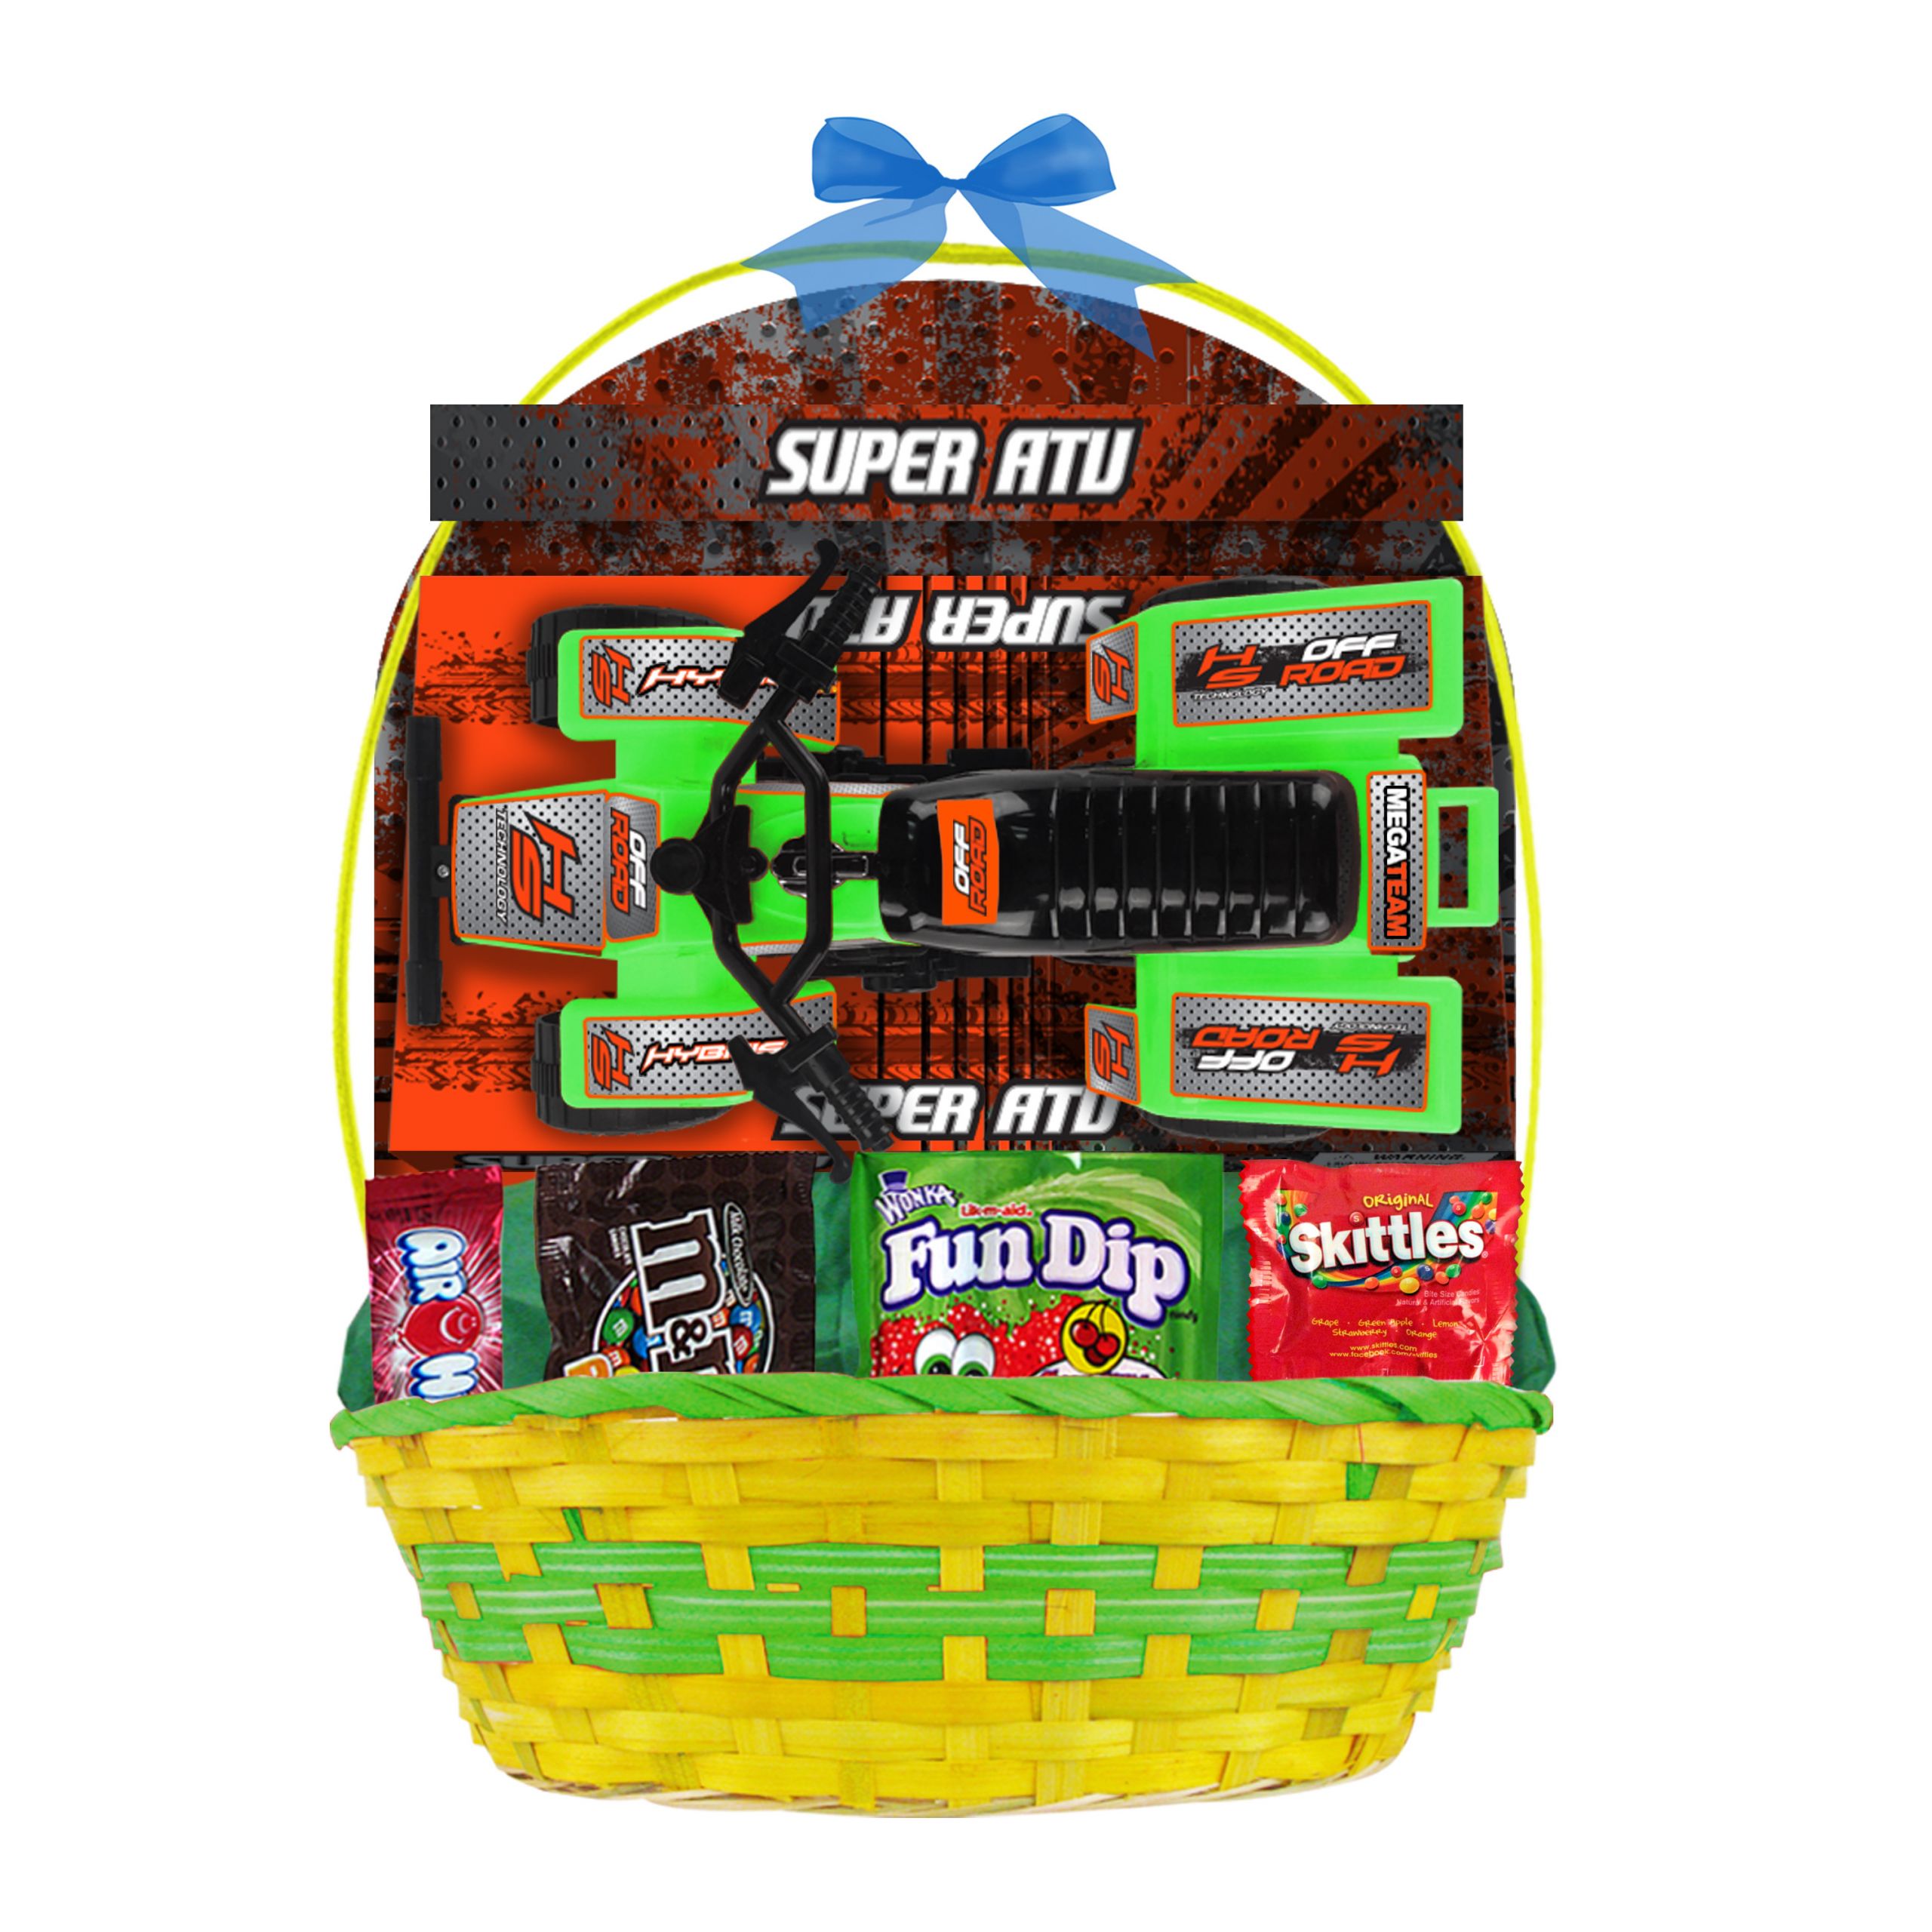 Walmart Easter Gifts
 Megatoys Easter Basket with ATV Vehicle & Can s